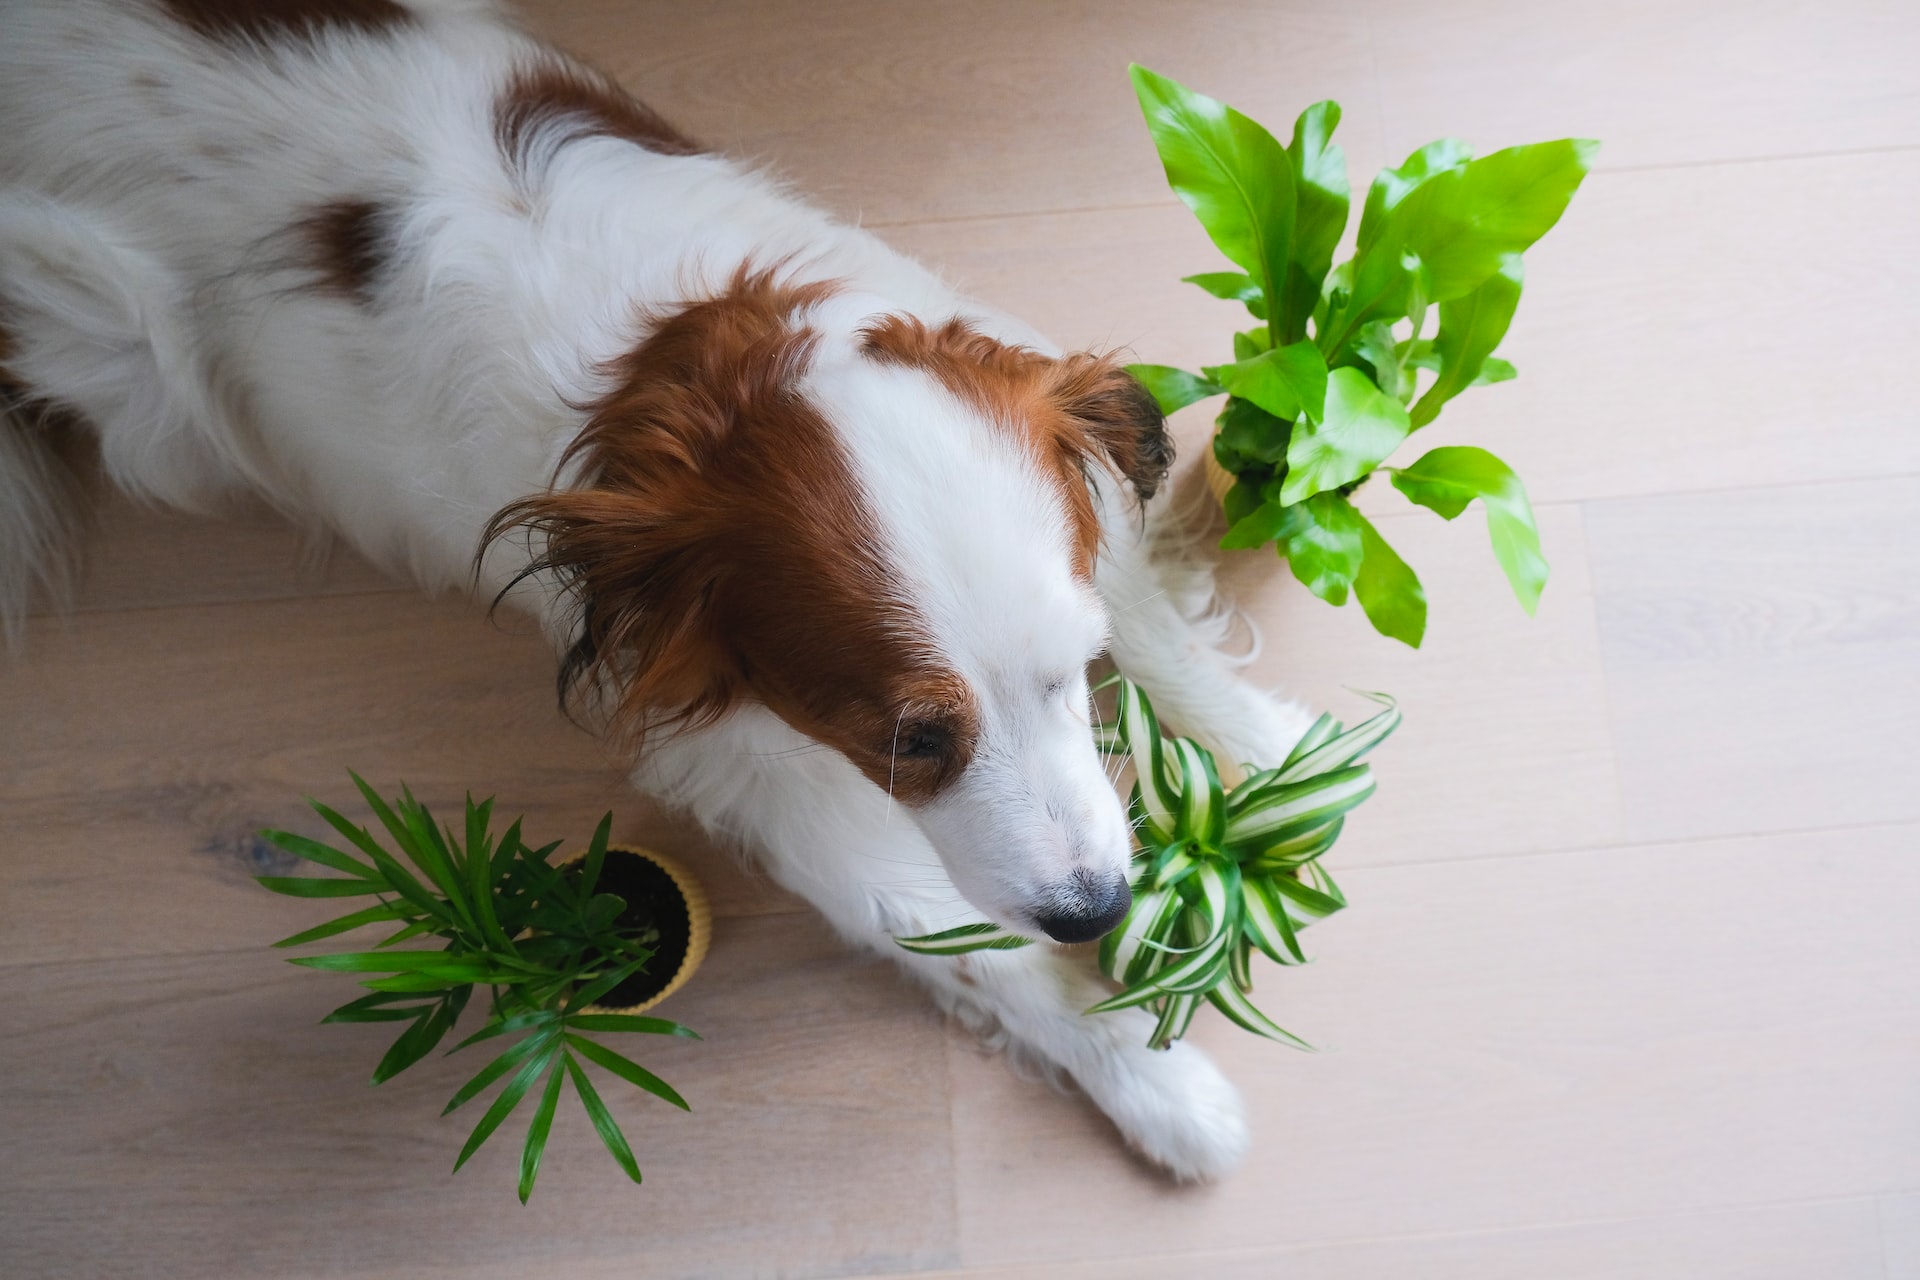 plants that are toxic to pets